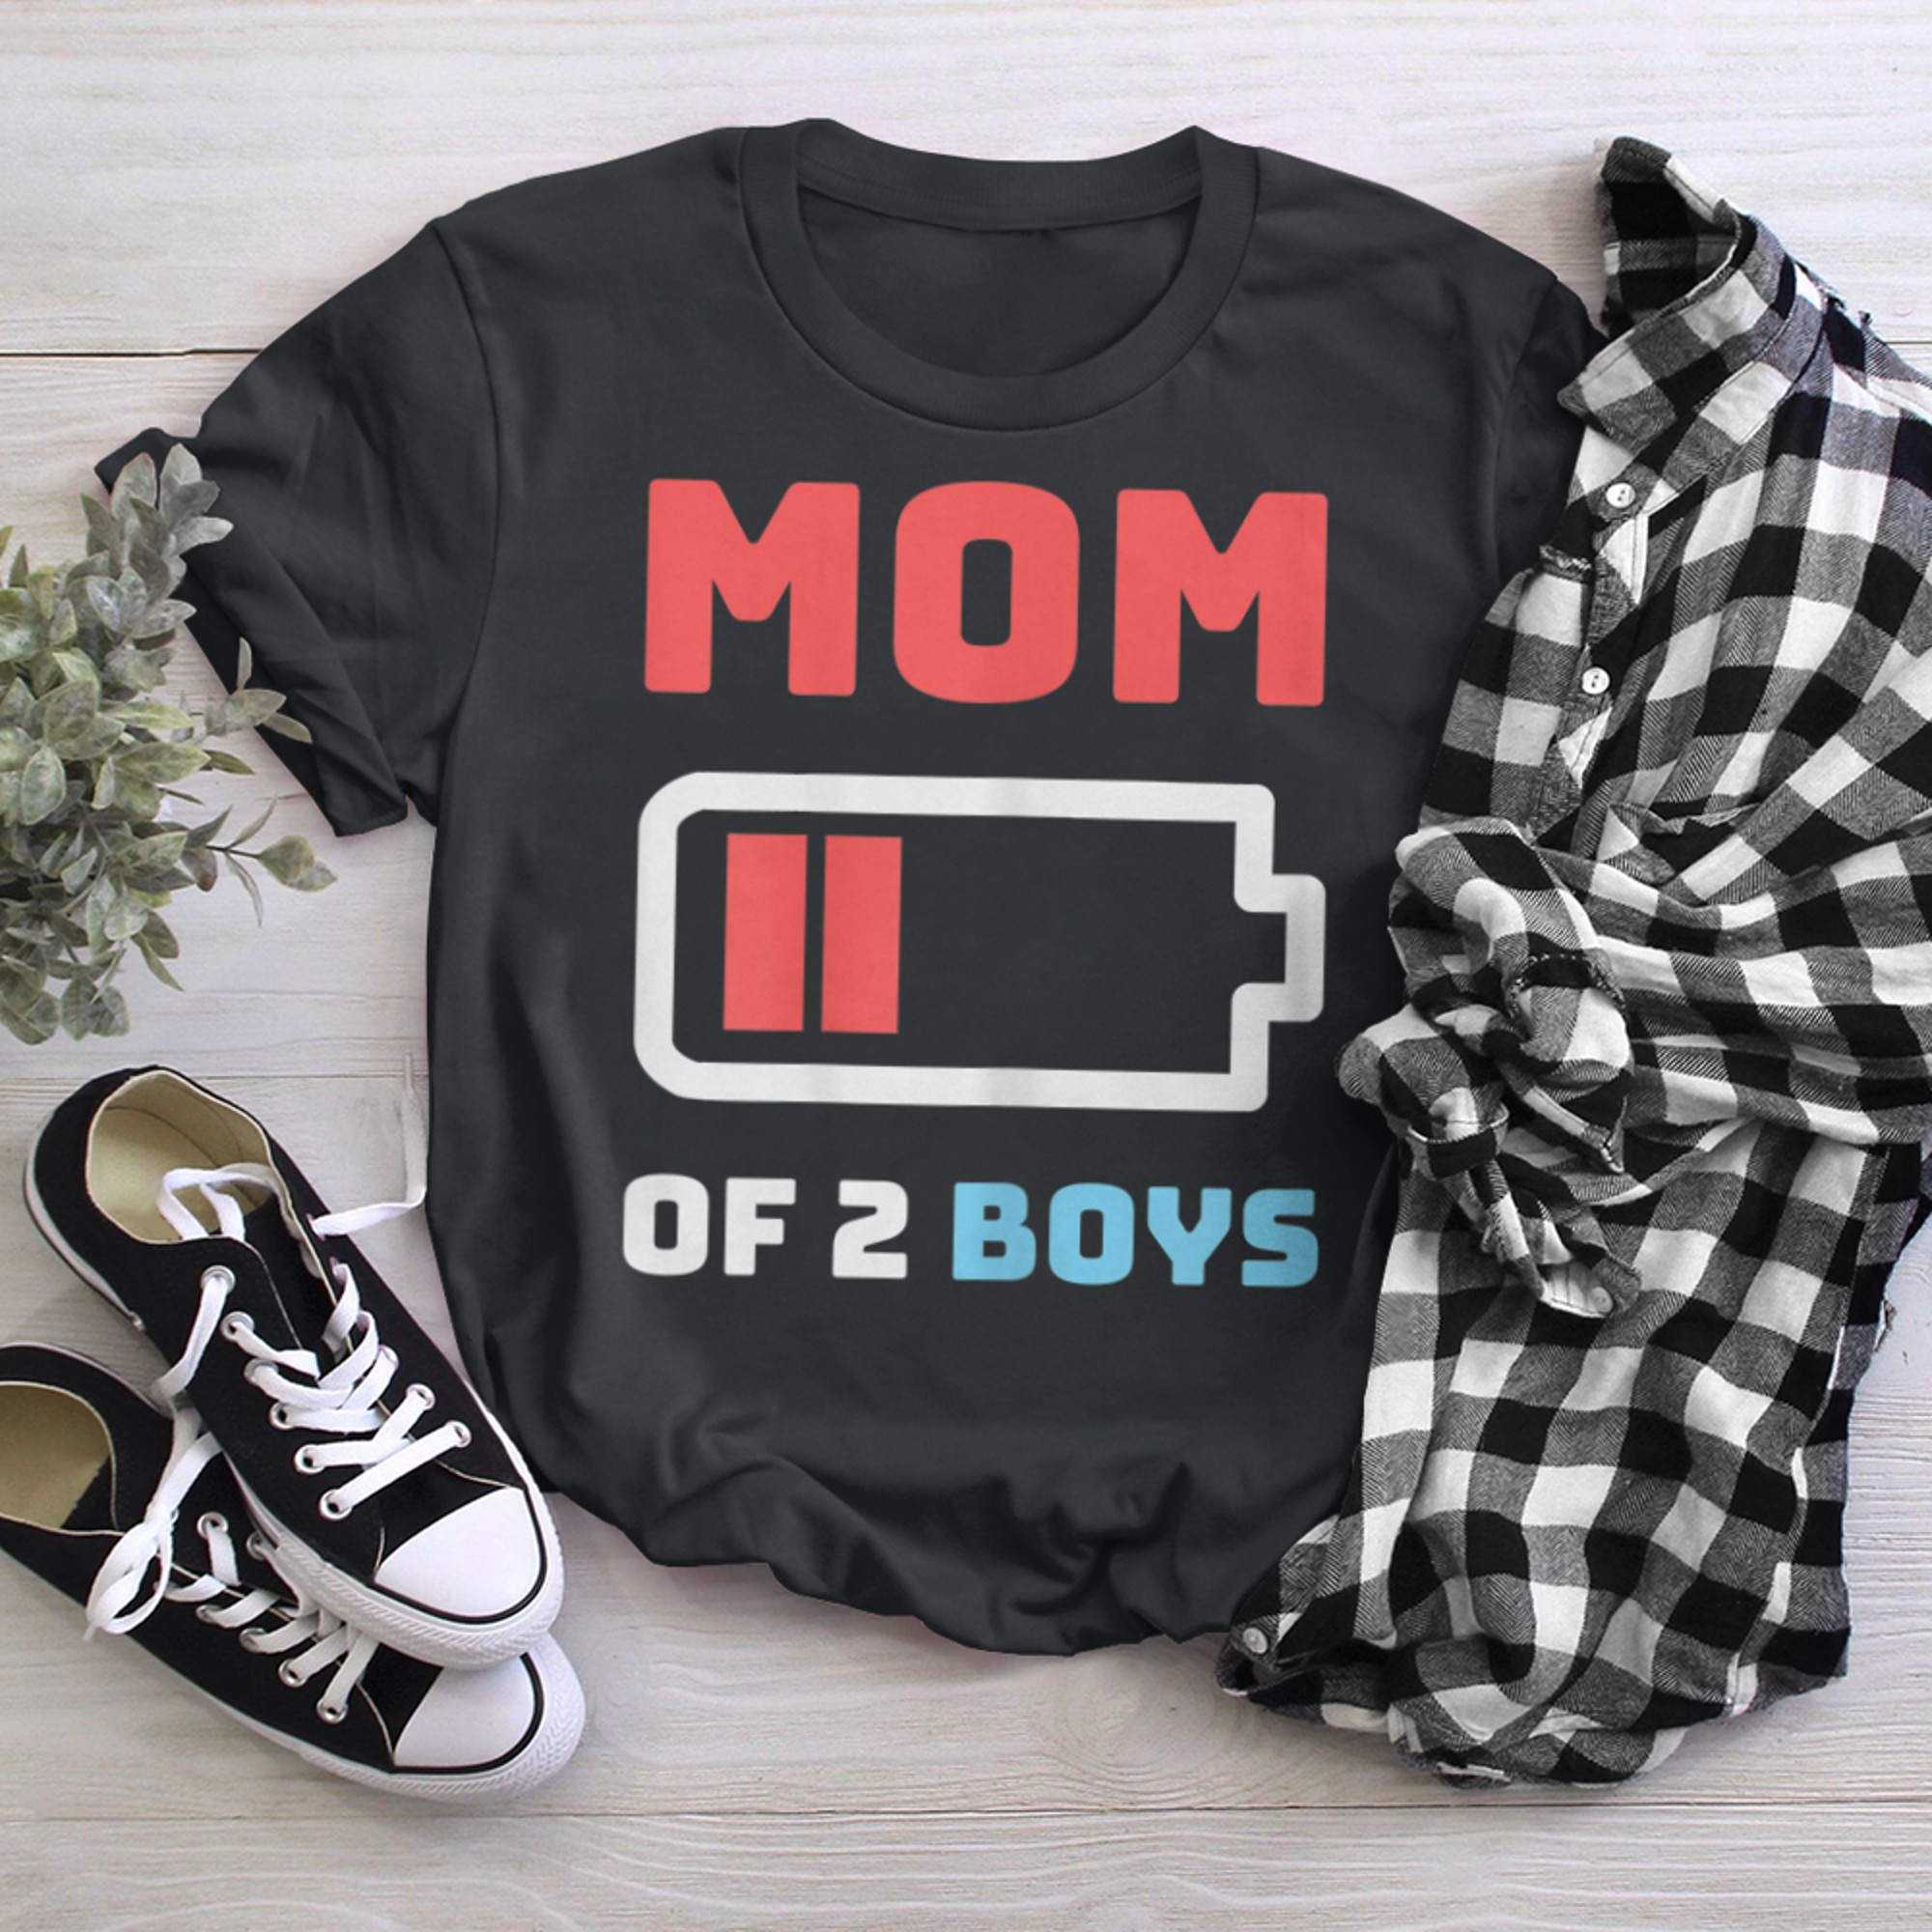 Mom of Low Battery Humor Mother's Day t-shirt black